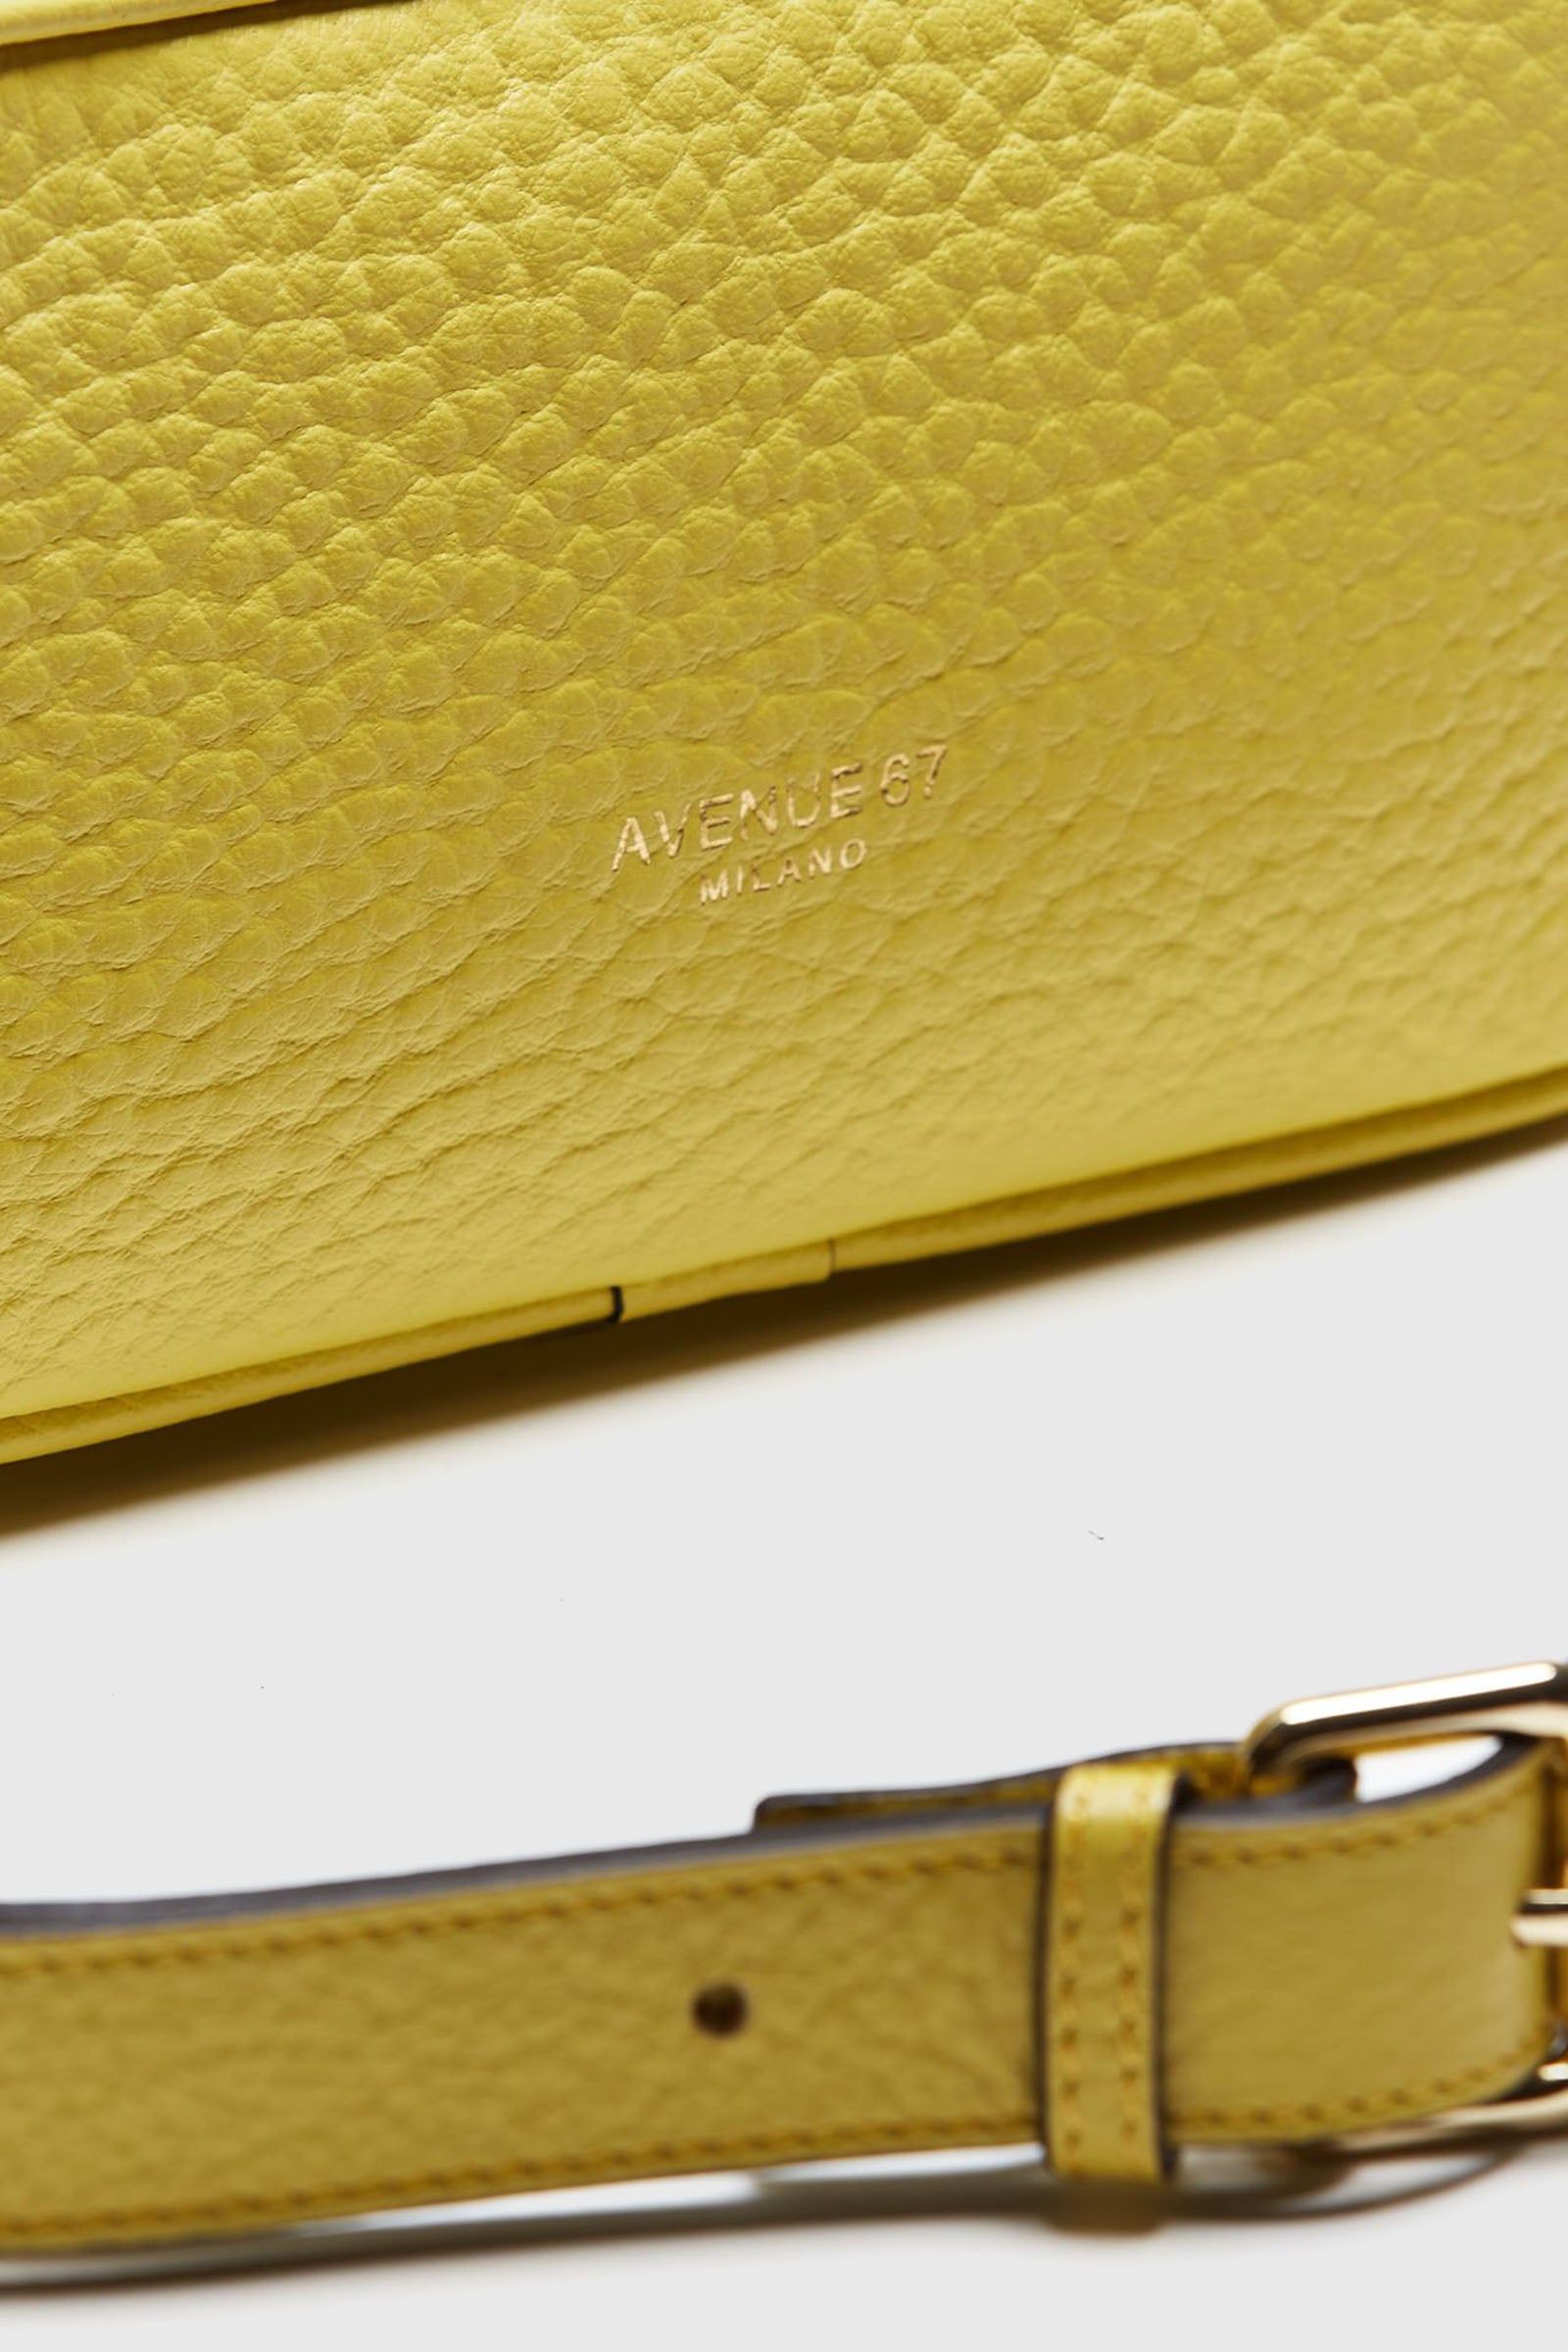 Avenue 67 Gabrielle Leather Bag Yellow - 5